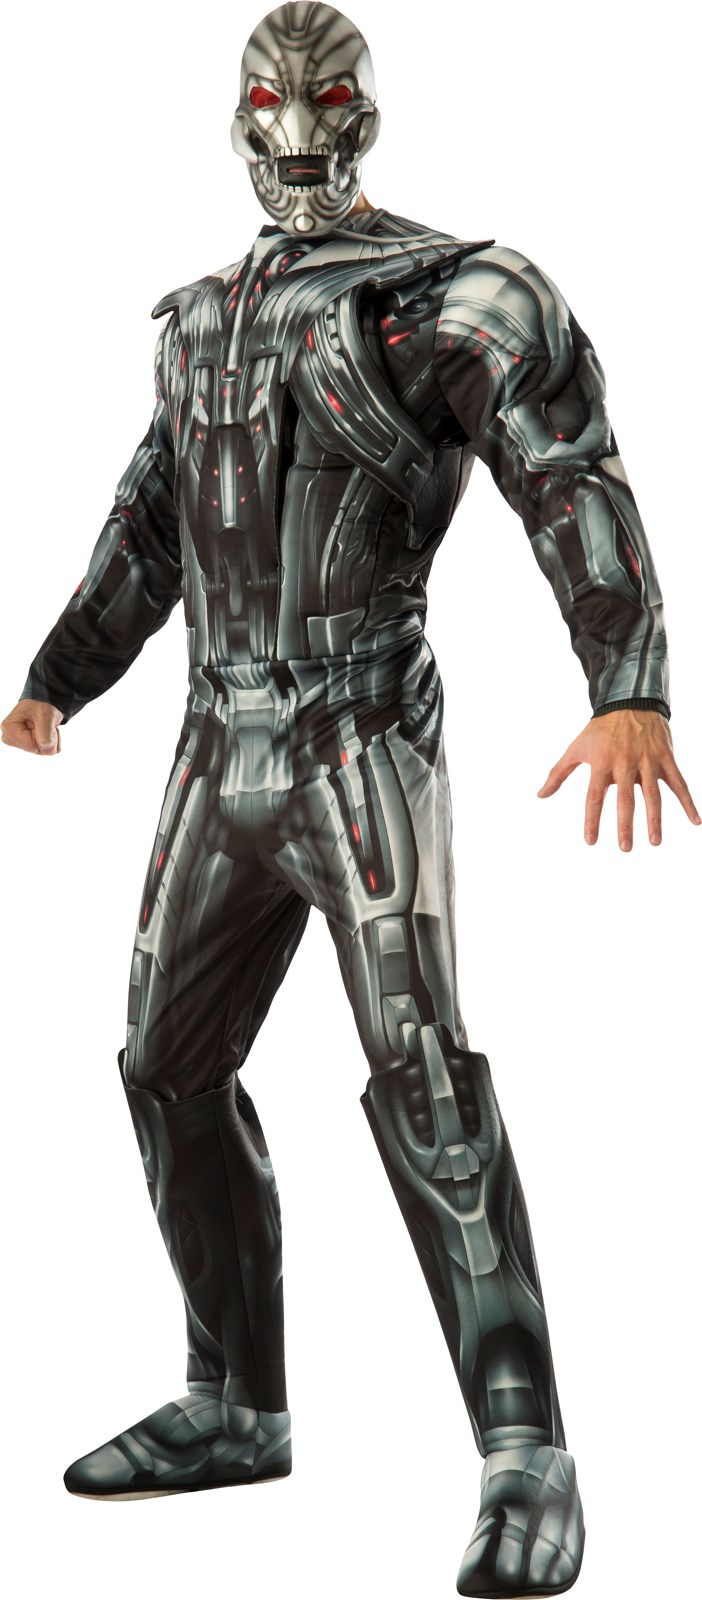 Avengers 2 – Age of Ultron: Deluxe Adult Ultron Costume